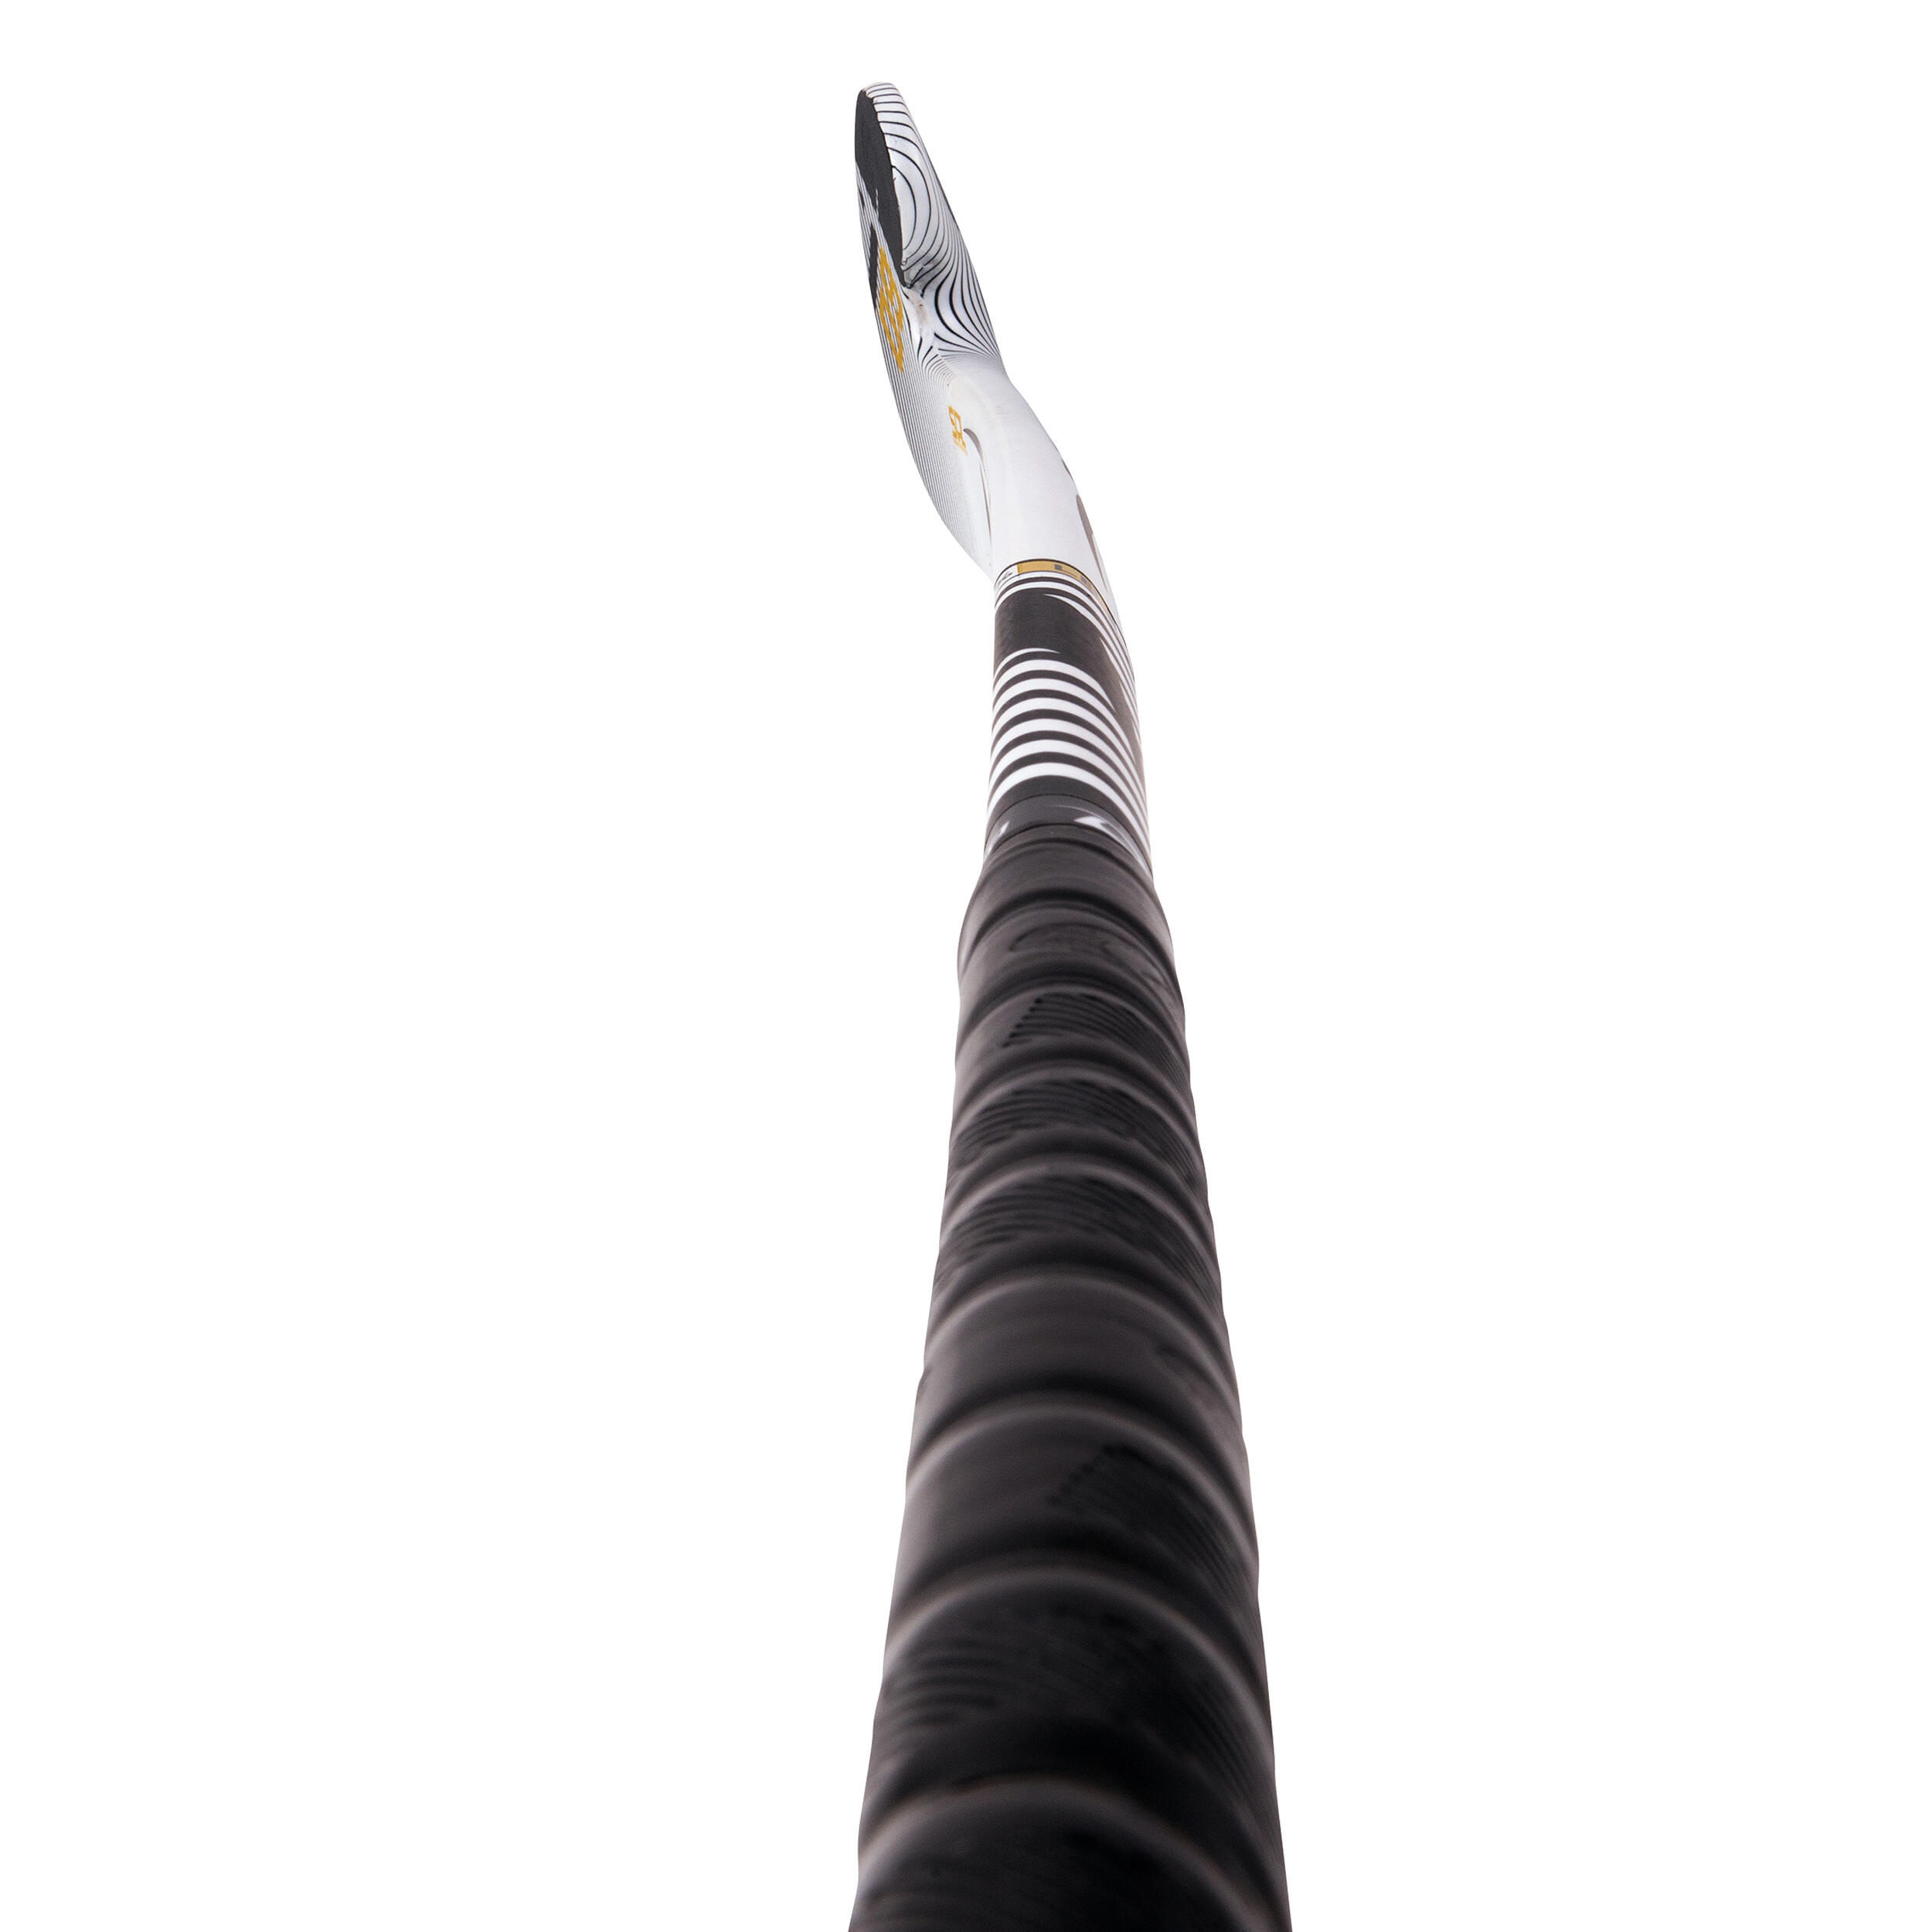 Adult Intermediate 60% Carbon Low Bow Field Hockey Stick CompotecC60 - White/Black 10/12